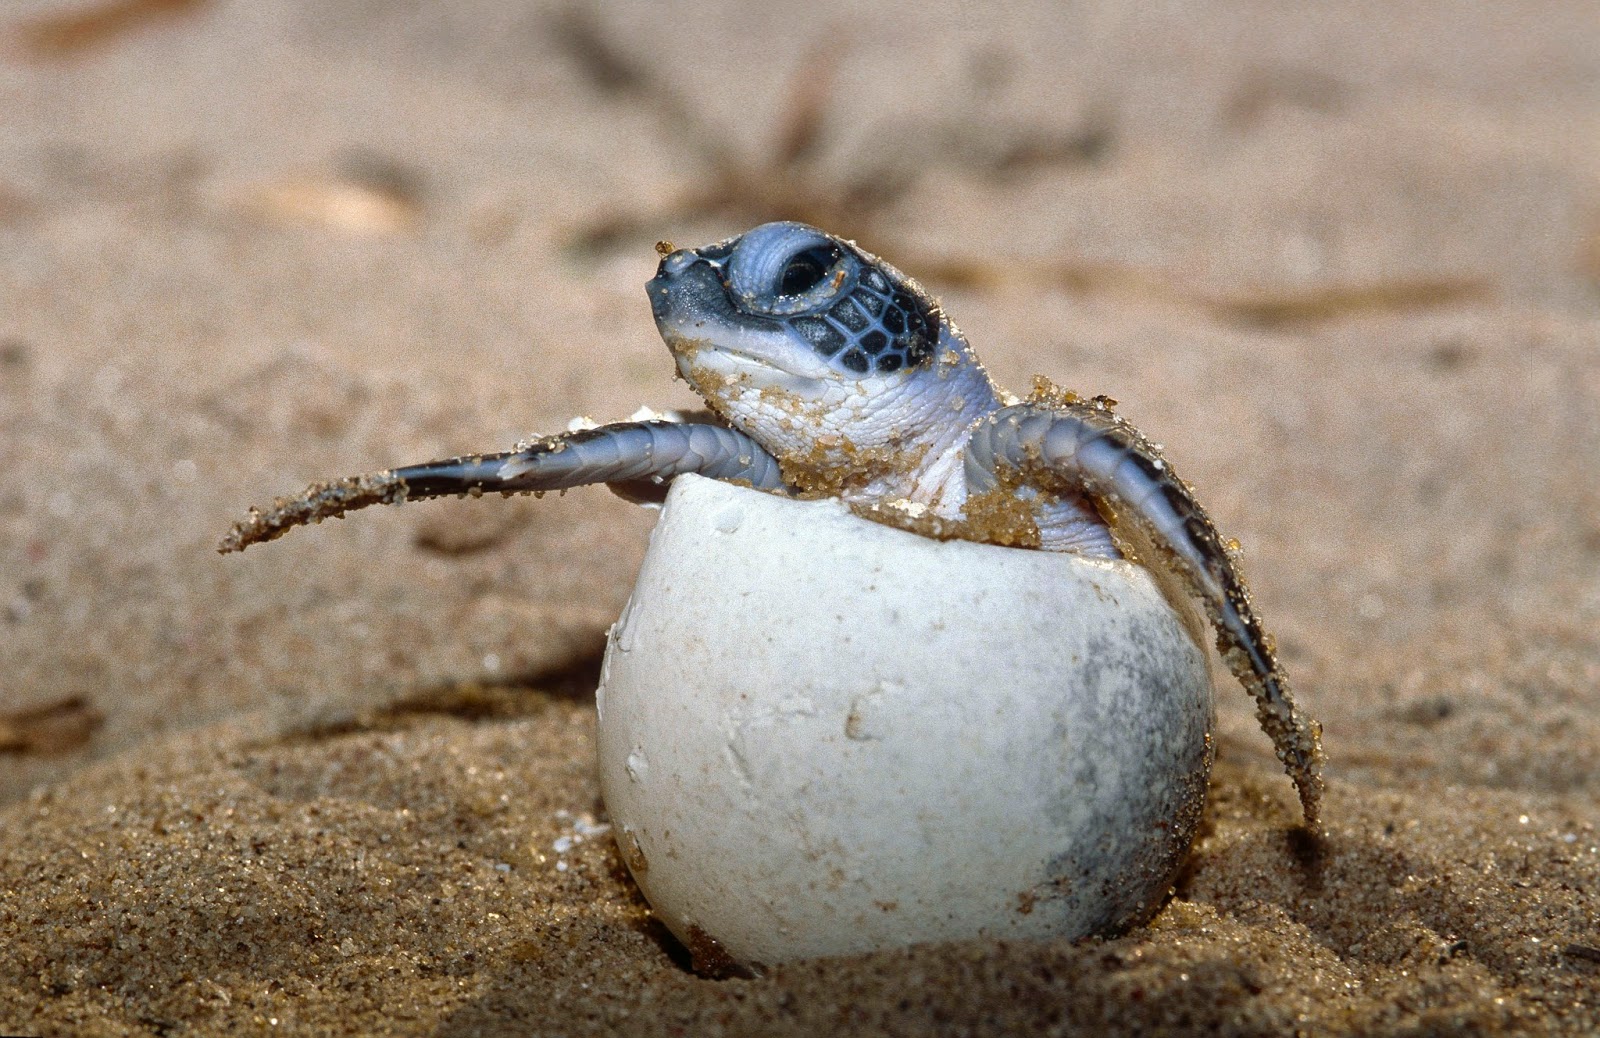 Water Logged: Four Ways You Can Help a Sea Turtle